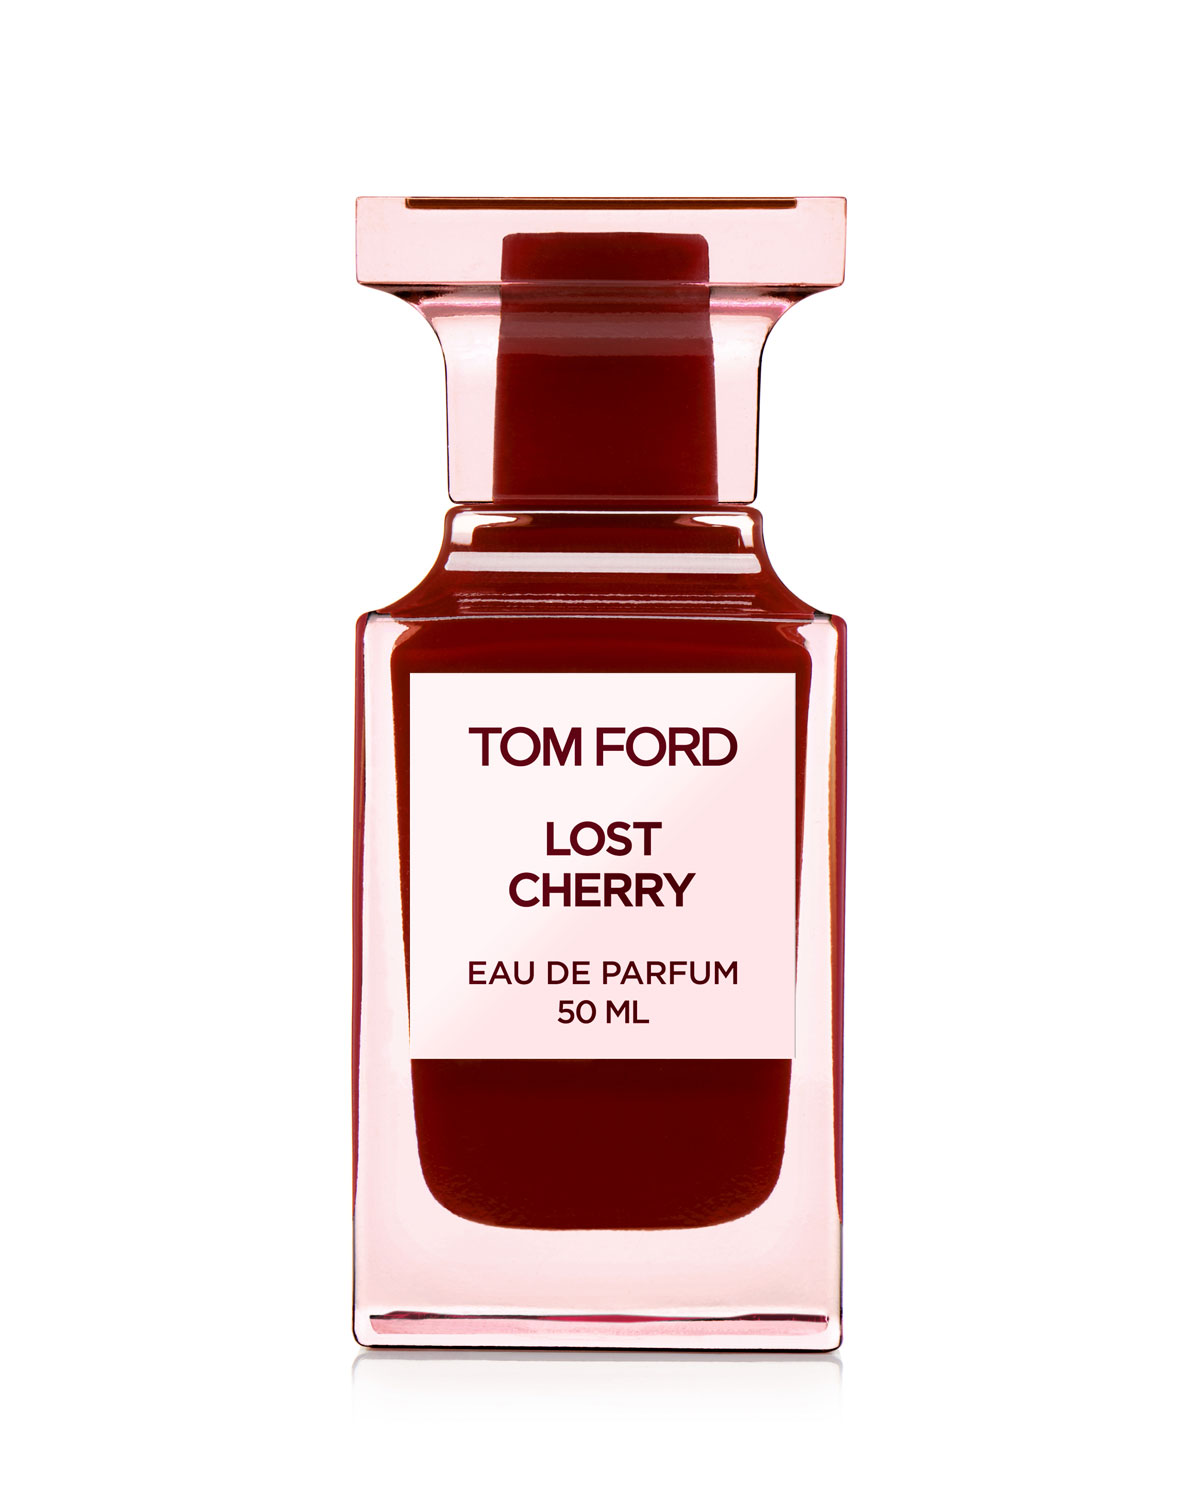 Lost Cherry By Tom Ford Perfume Sample Mini Travel SizeMy Custom Scent